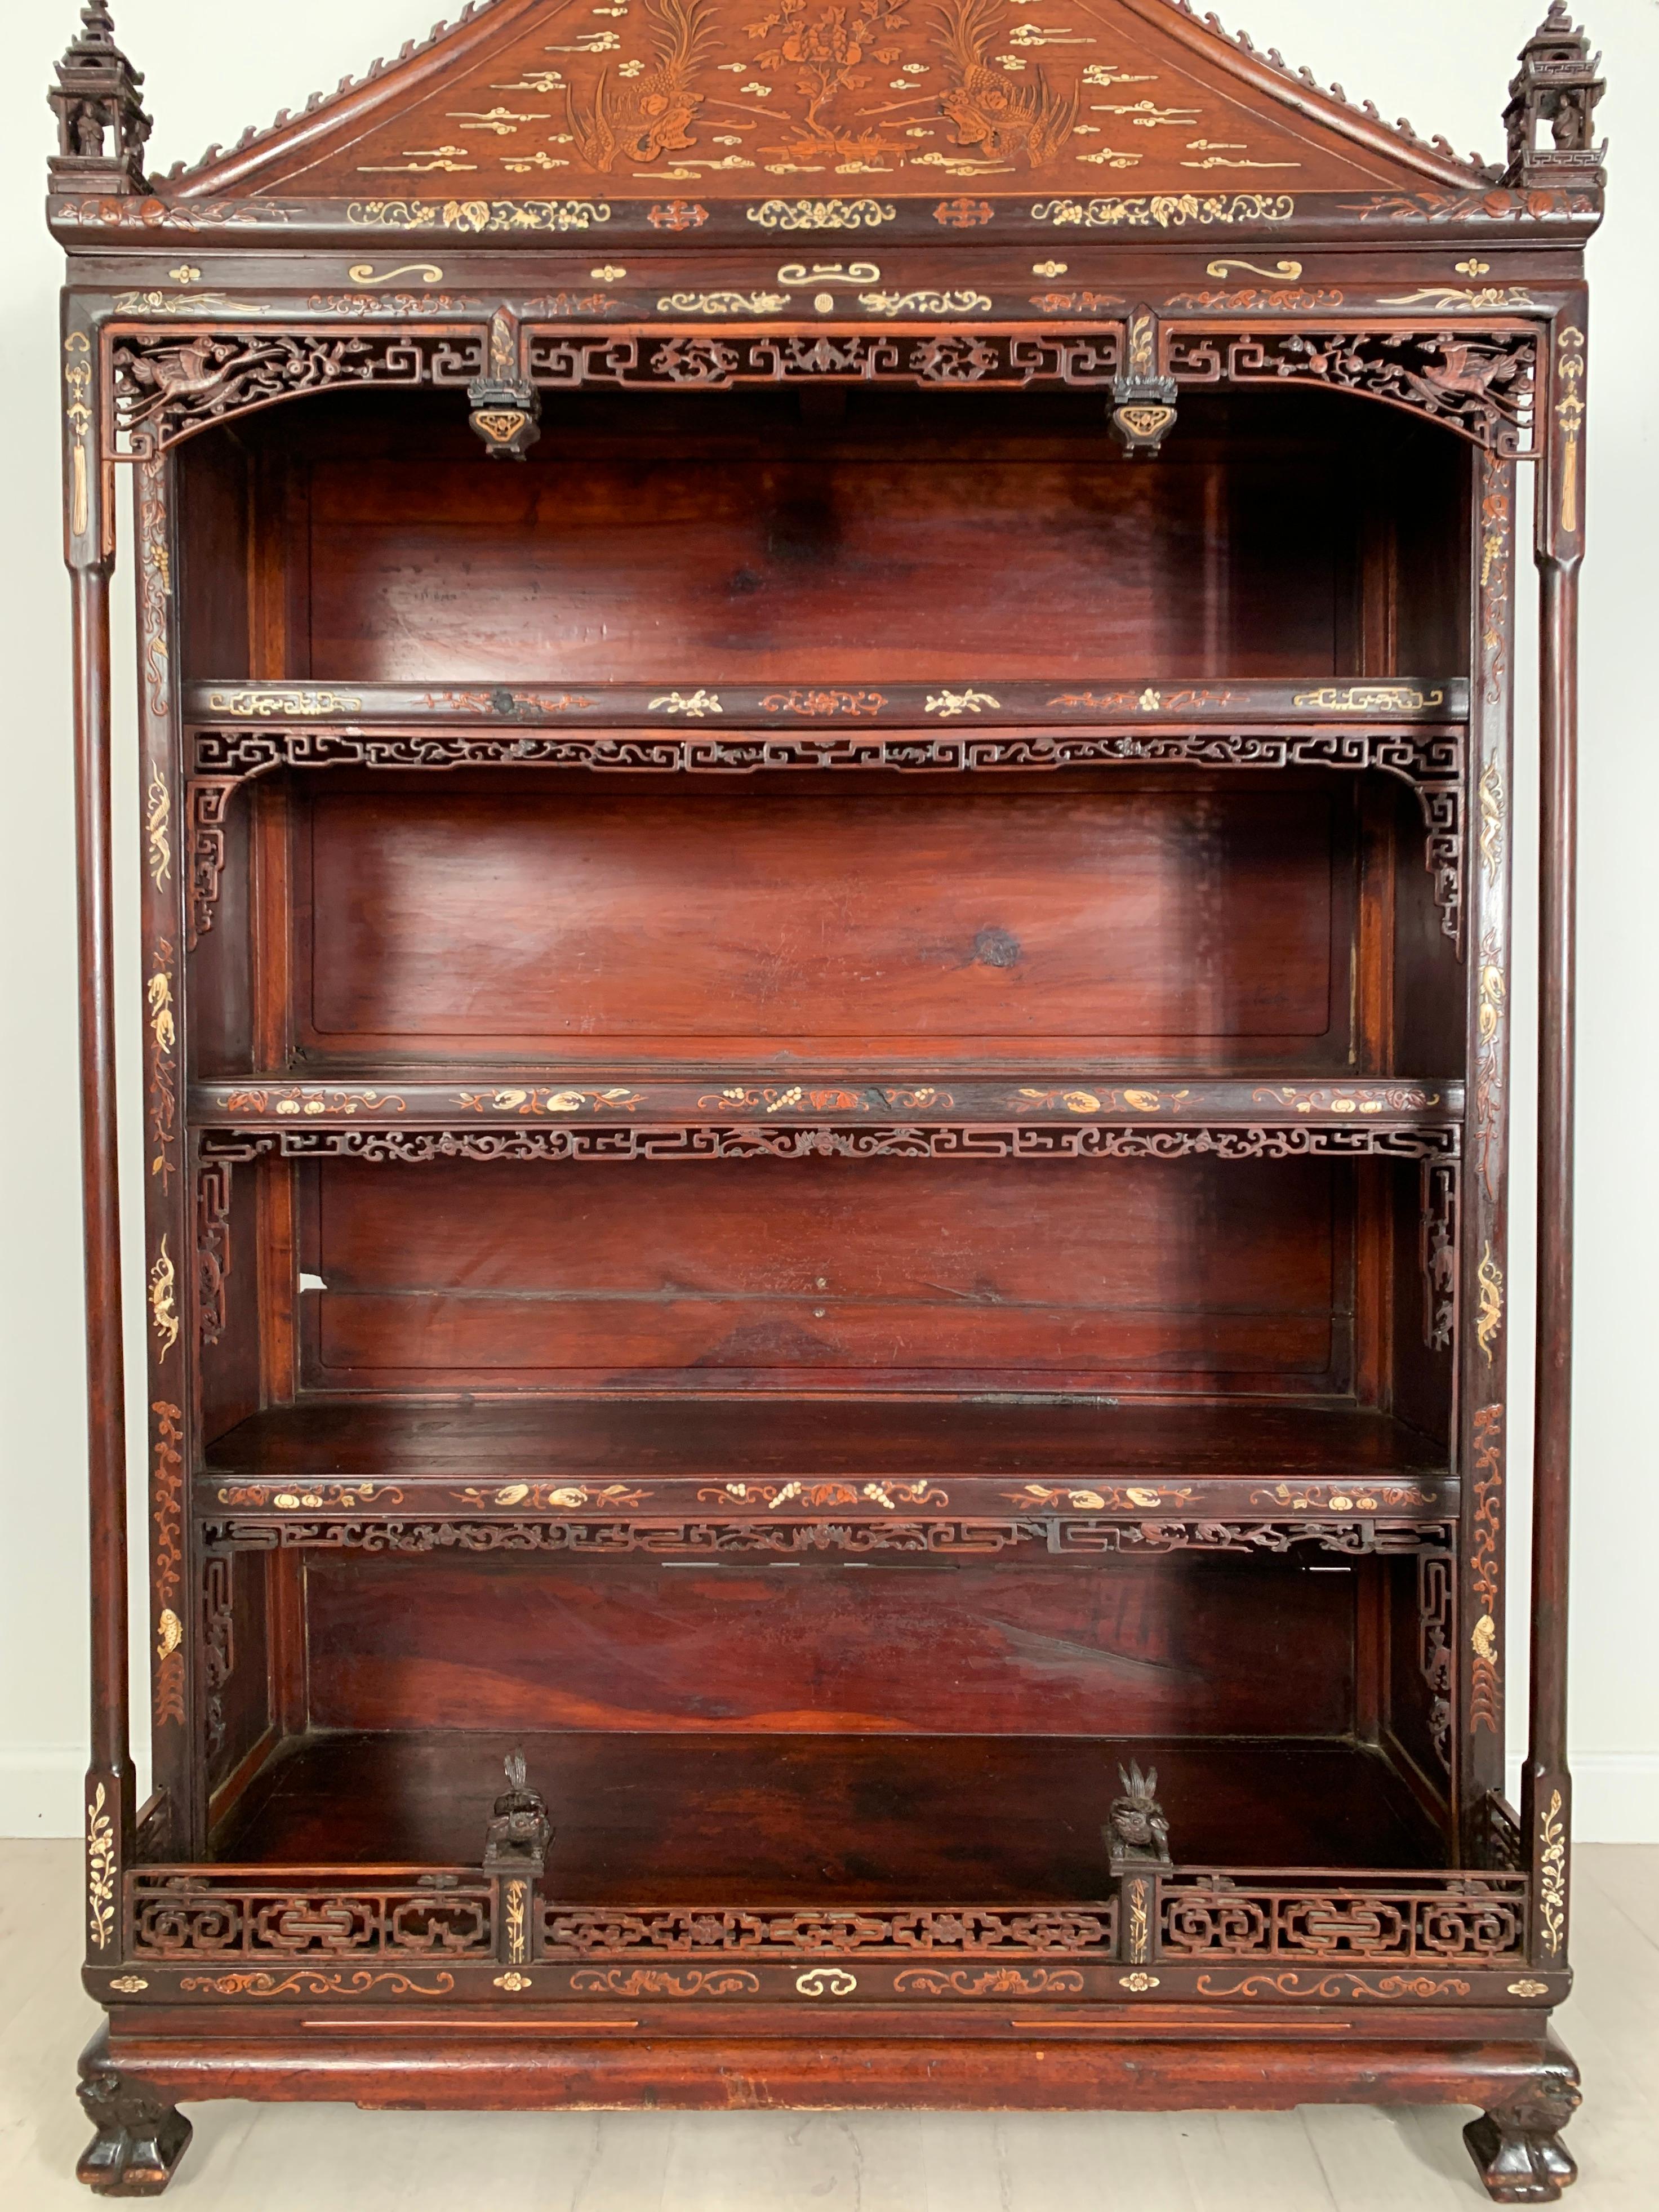 Chinese Peranakan Inlaid Hardwood Pagoda Display Cabinet, Early 20th Century For Sale 3